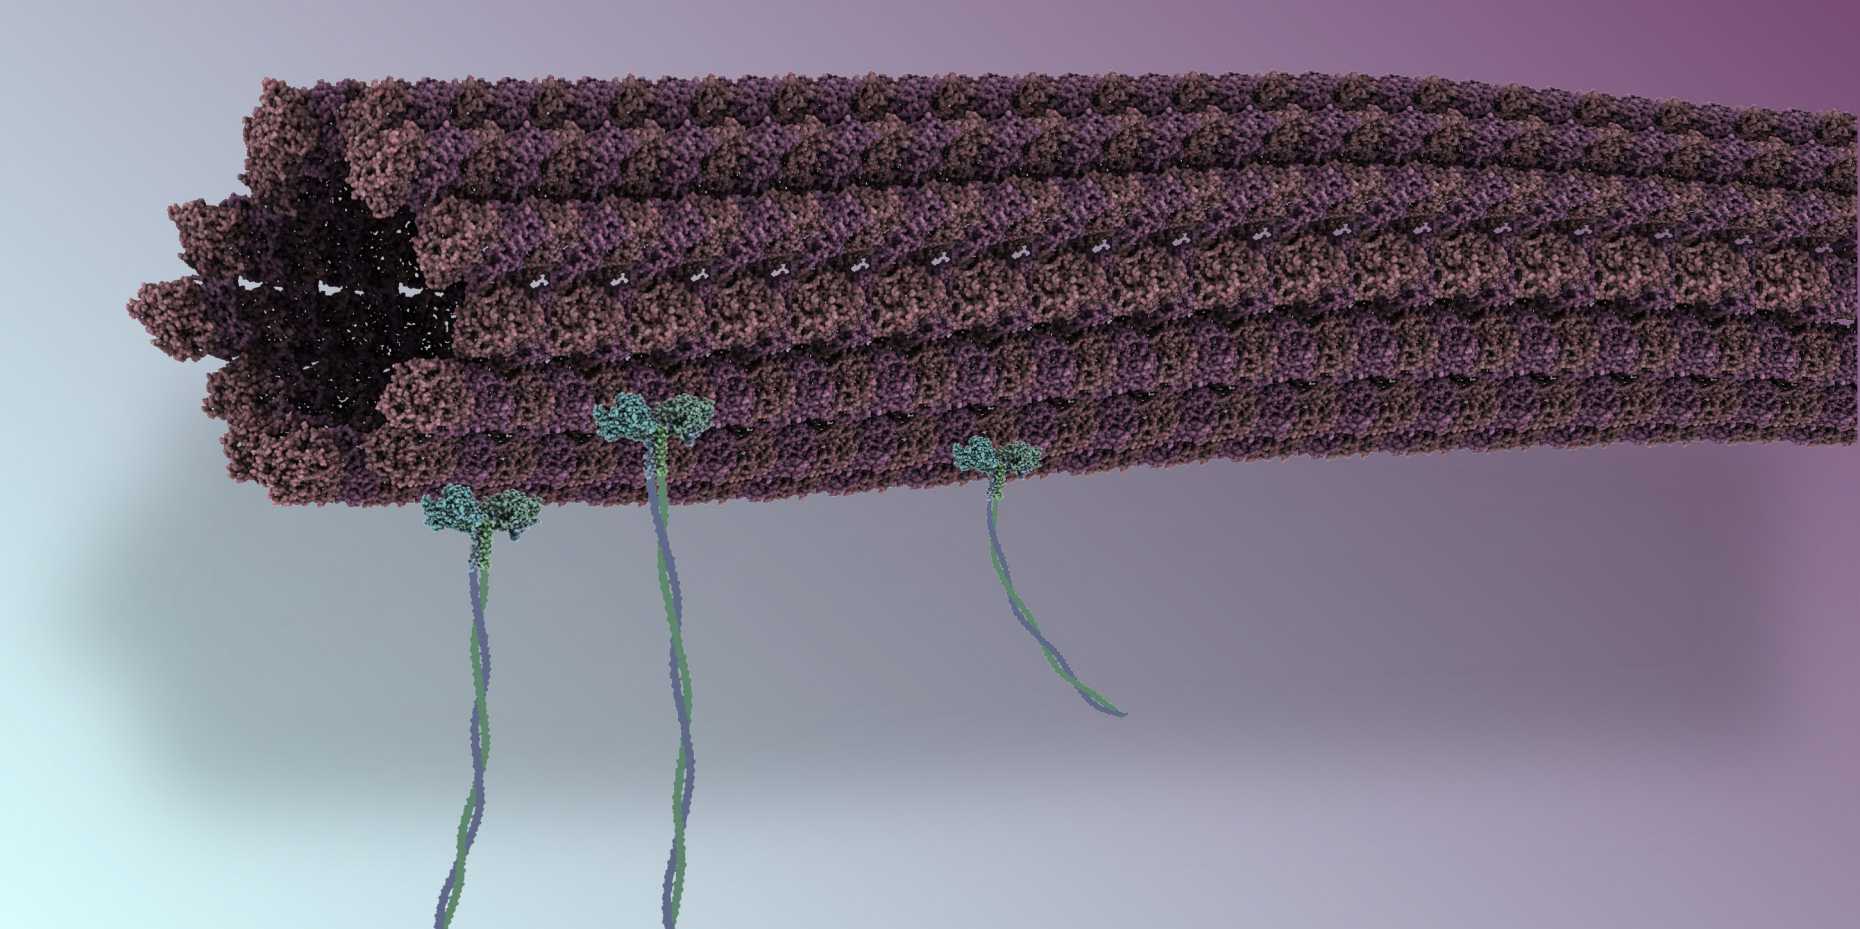 Enlarged view: On the nano assembly line, tiny biological tubes called microtubules serve as transporters for the assembly of several molecular objects.